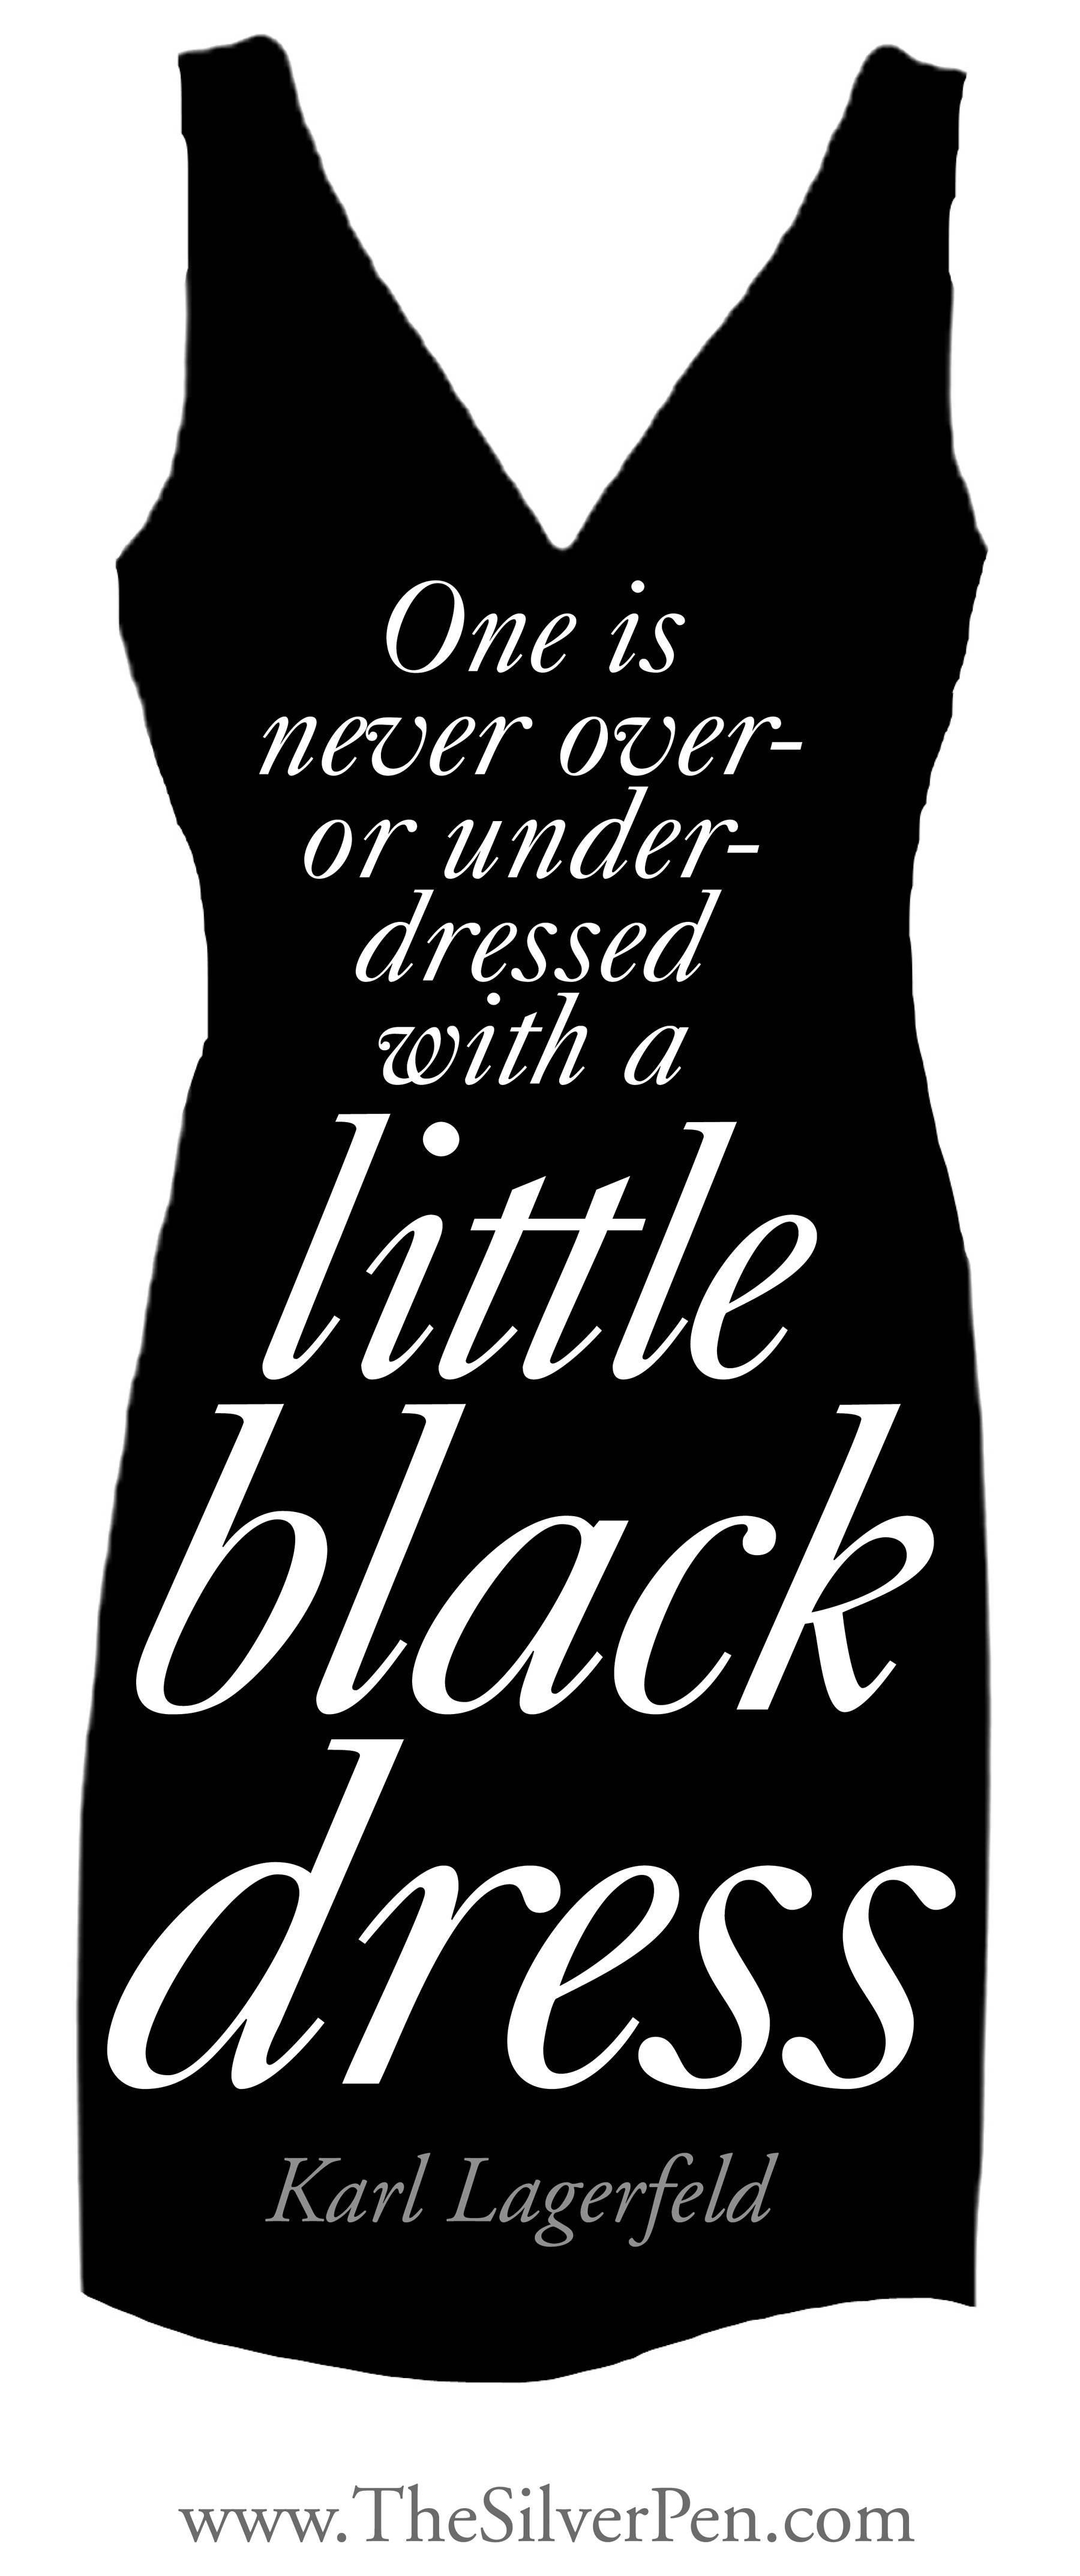 Share 152+ black and white dress quotes 